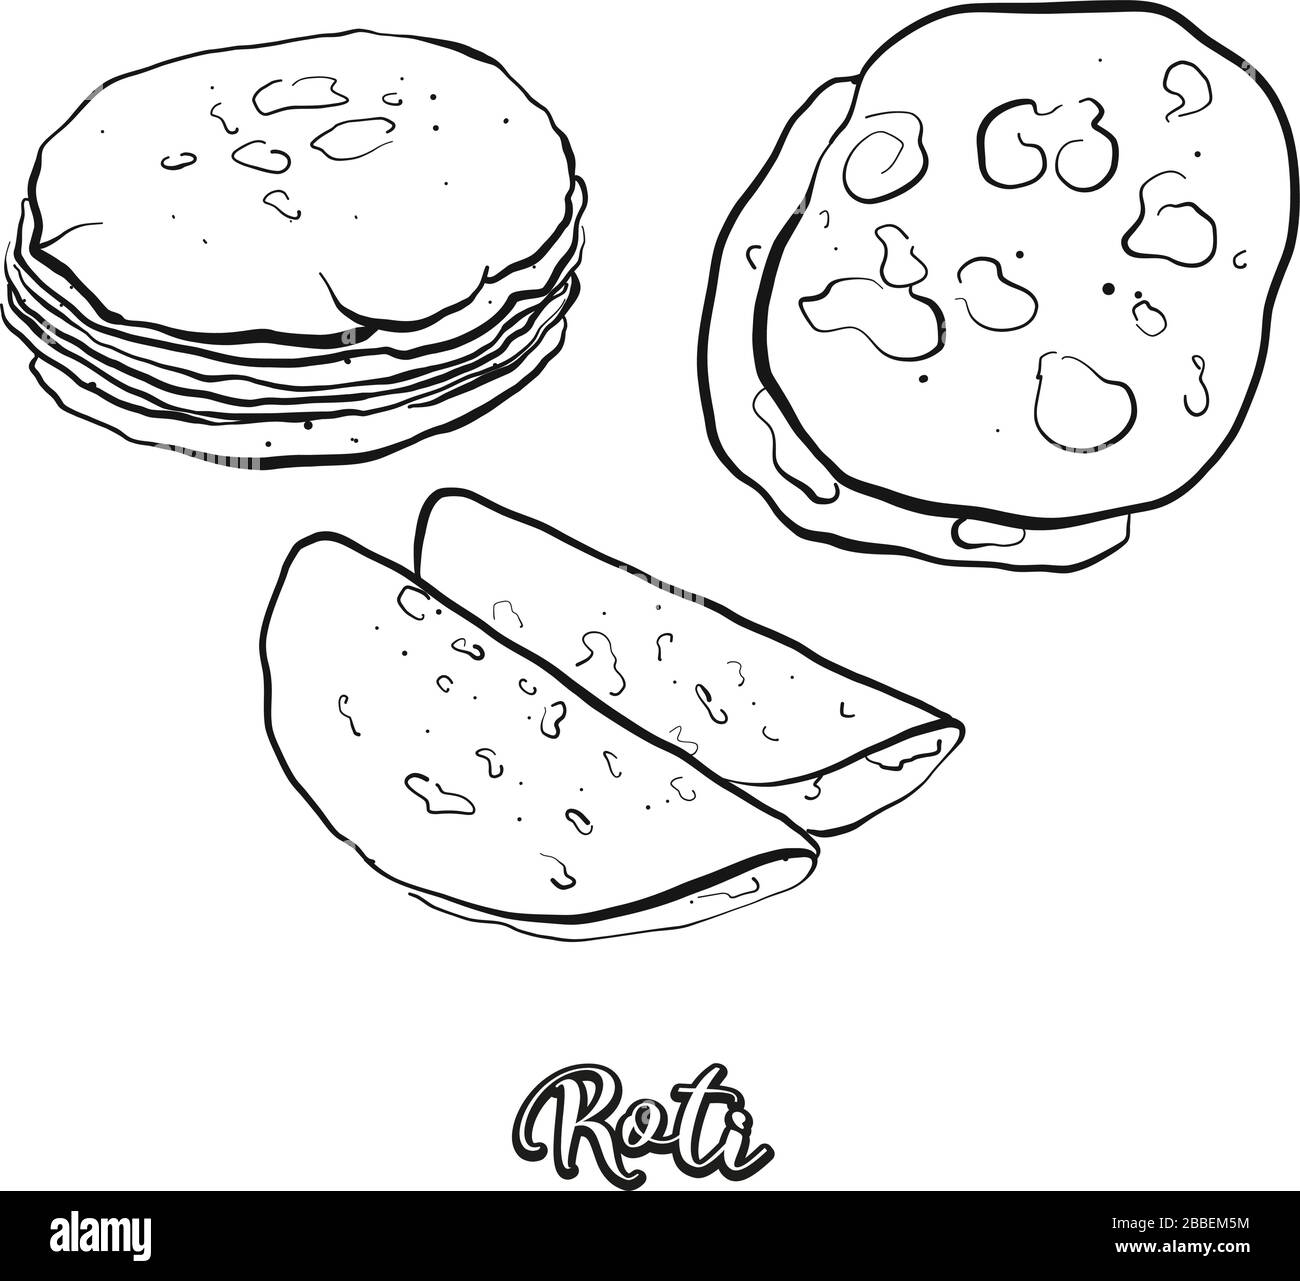 Roti food sketch separated on white vector drawing of flatbread usually  known in india pakistan food illustration series  CanStock